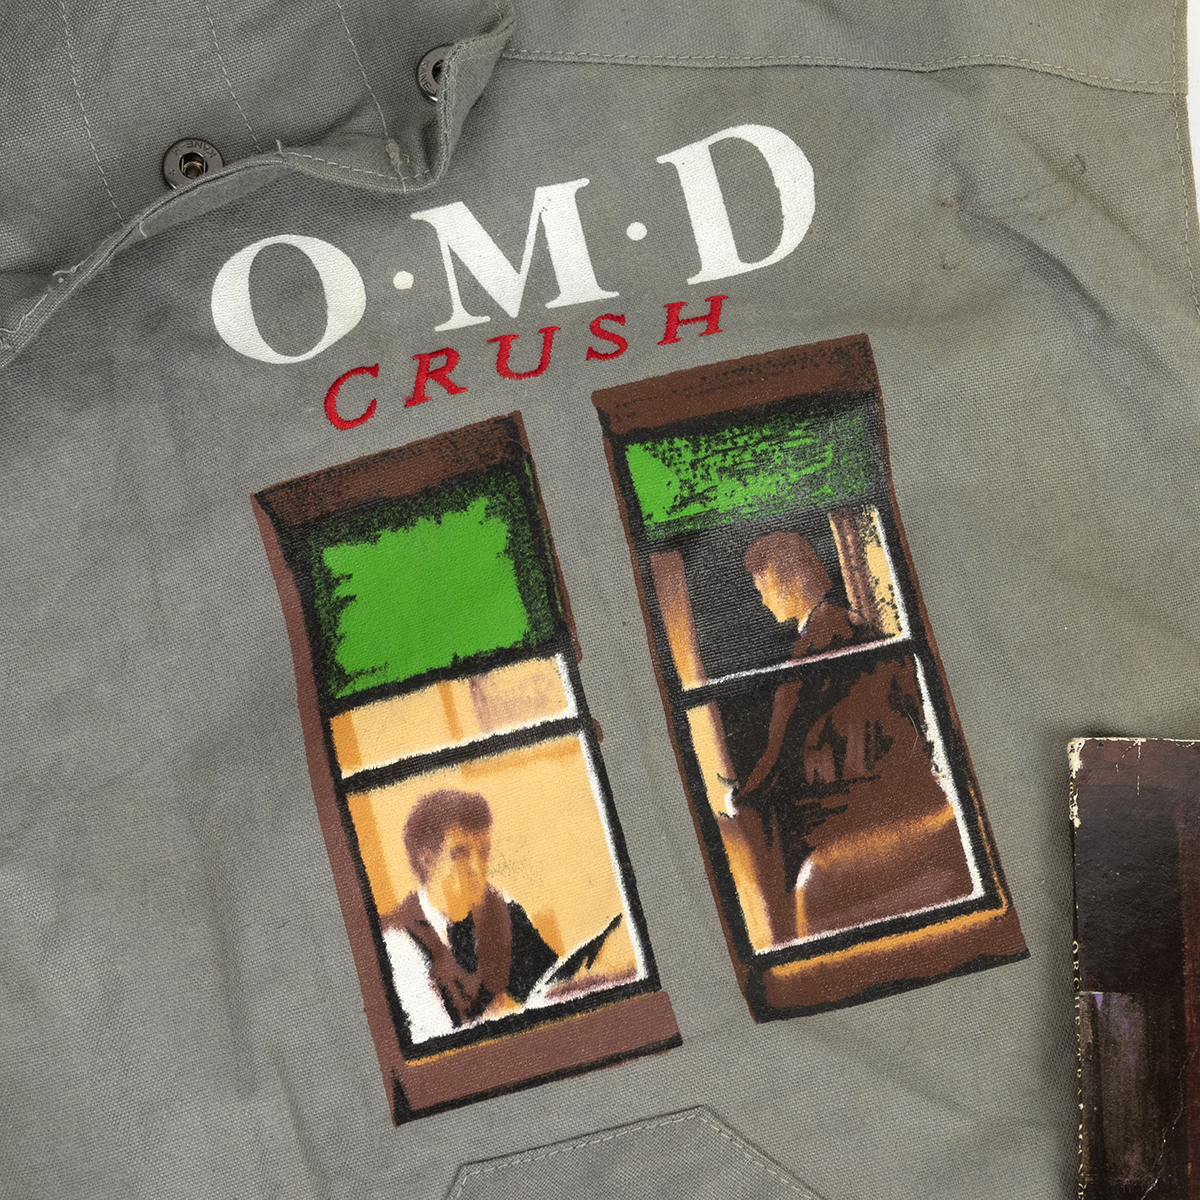 Orchestral Manoeuvres in the Dark/O.M.D - A promotional "Crush" album launch party grey gillet, s... - Image 2 of 3